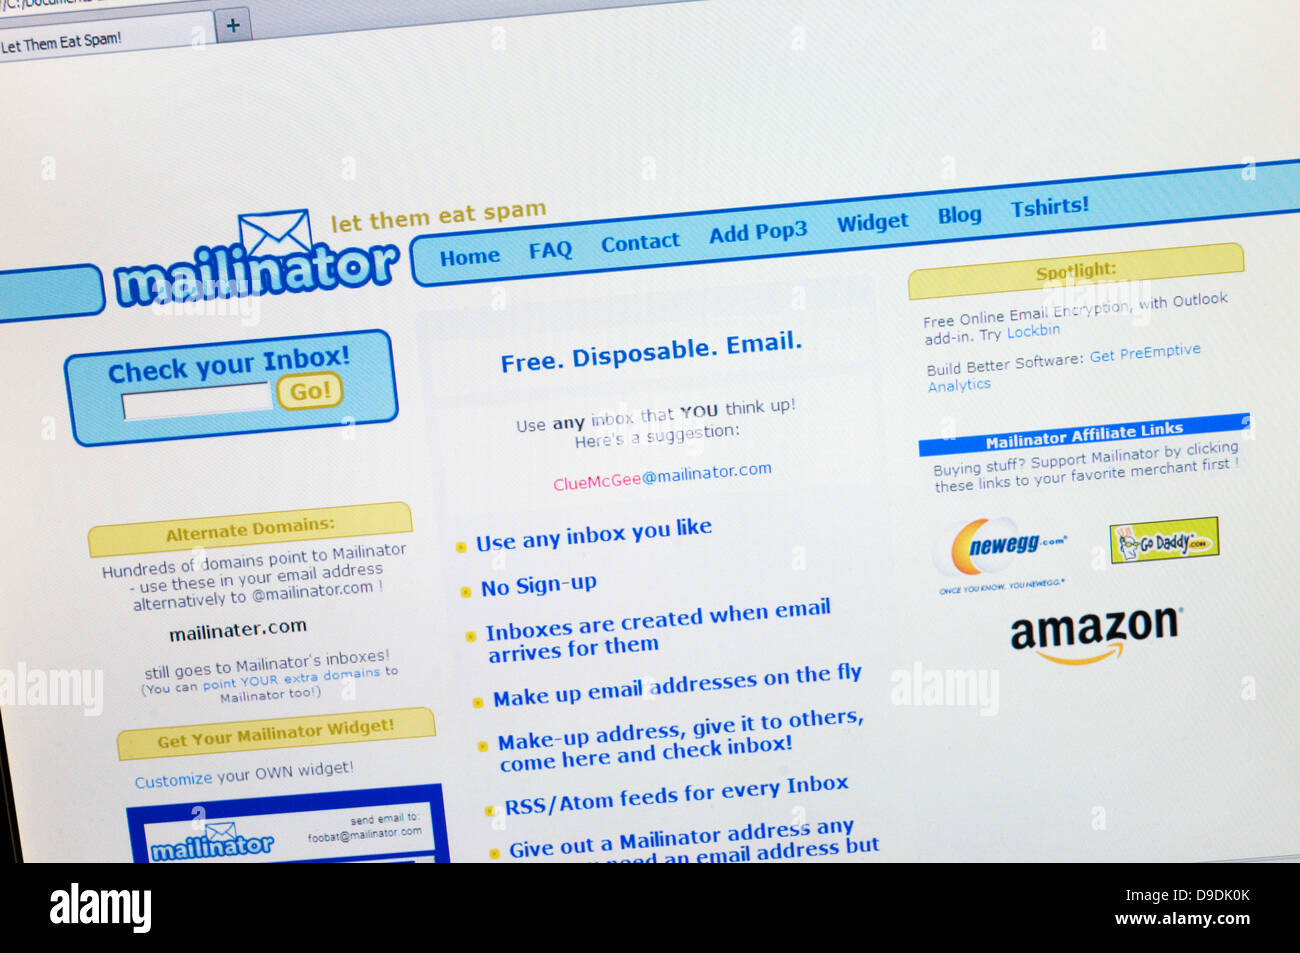 The mailinator website provides a free disposable email address service. Stock Photo